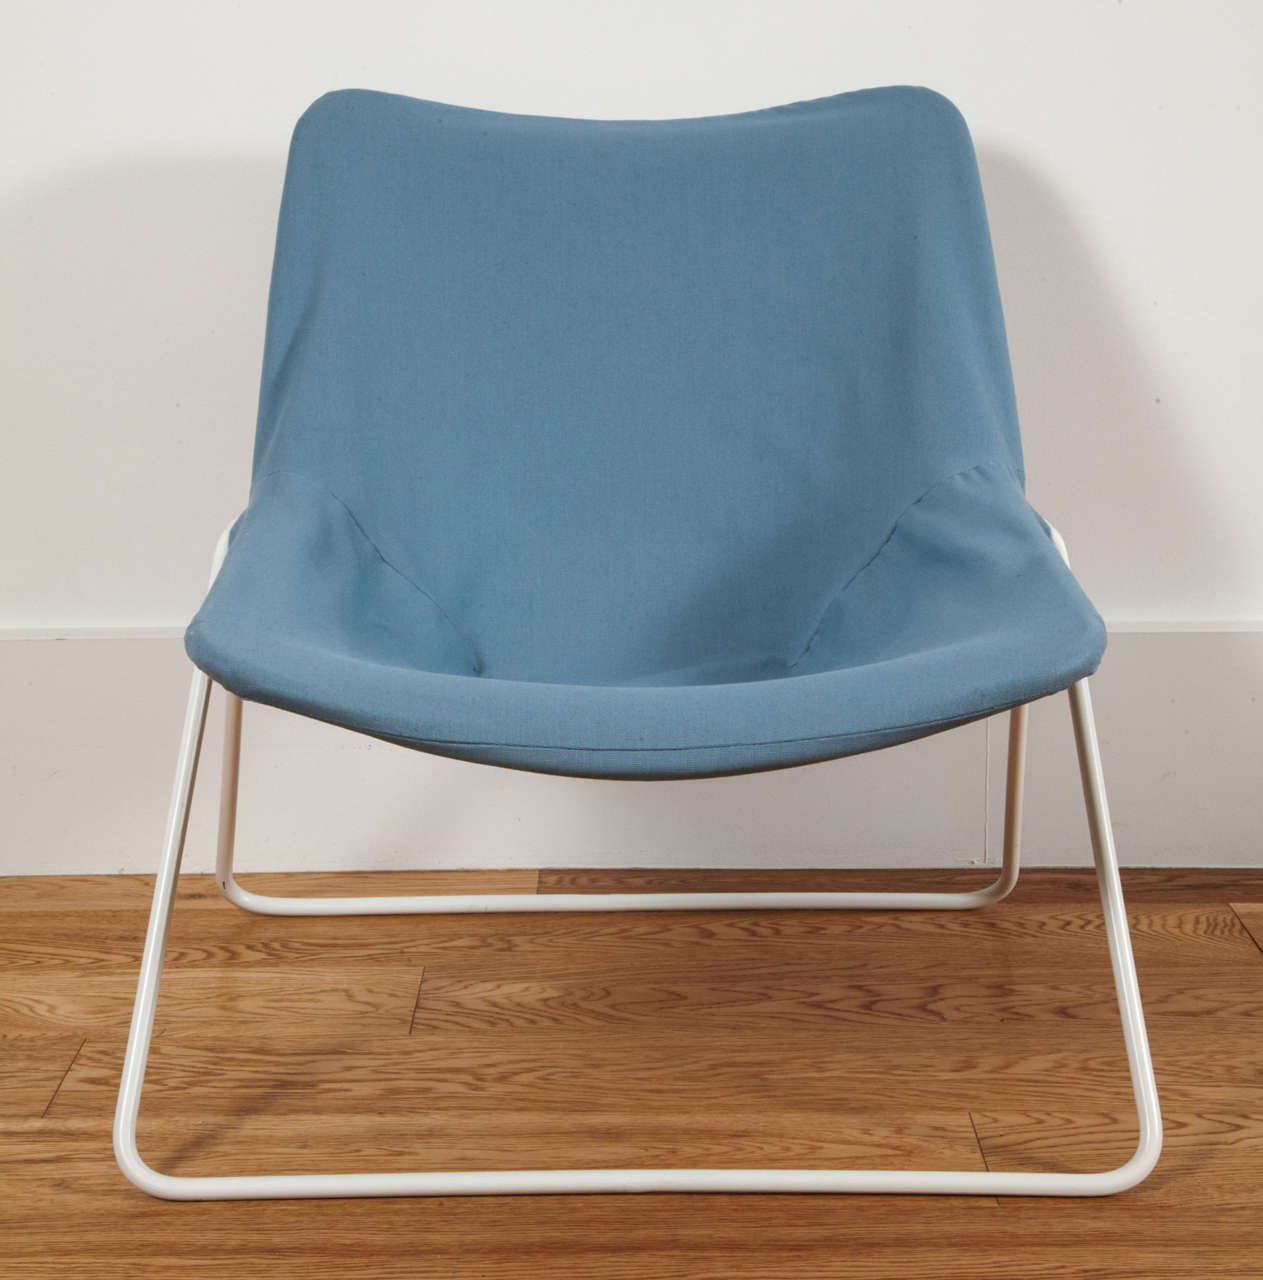 Cotton Chair of G1 by Pierre Guariche - Airborne edition - 1953 For Sale